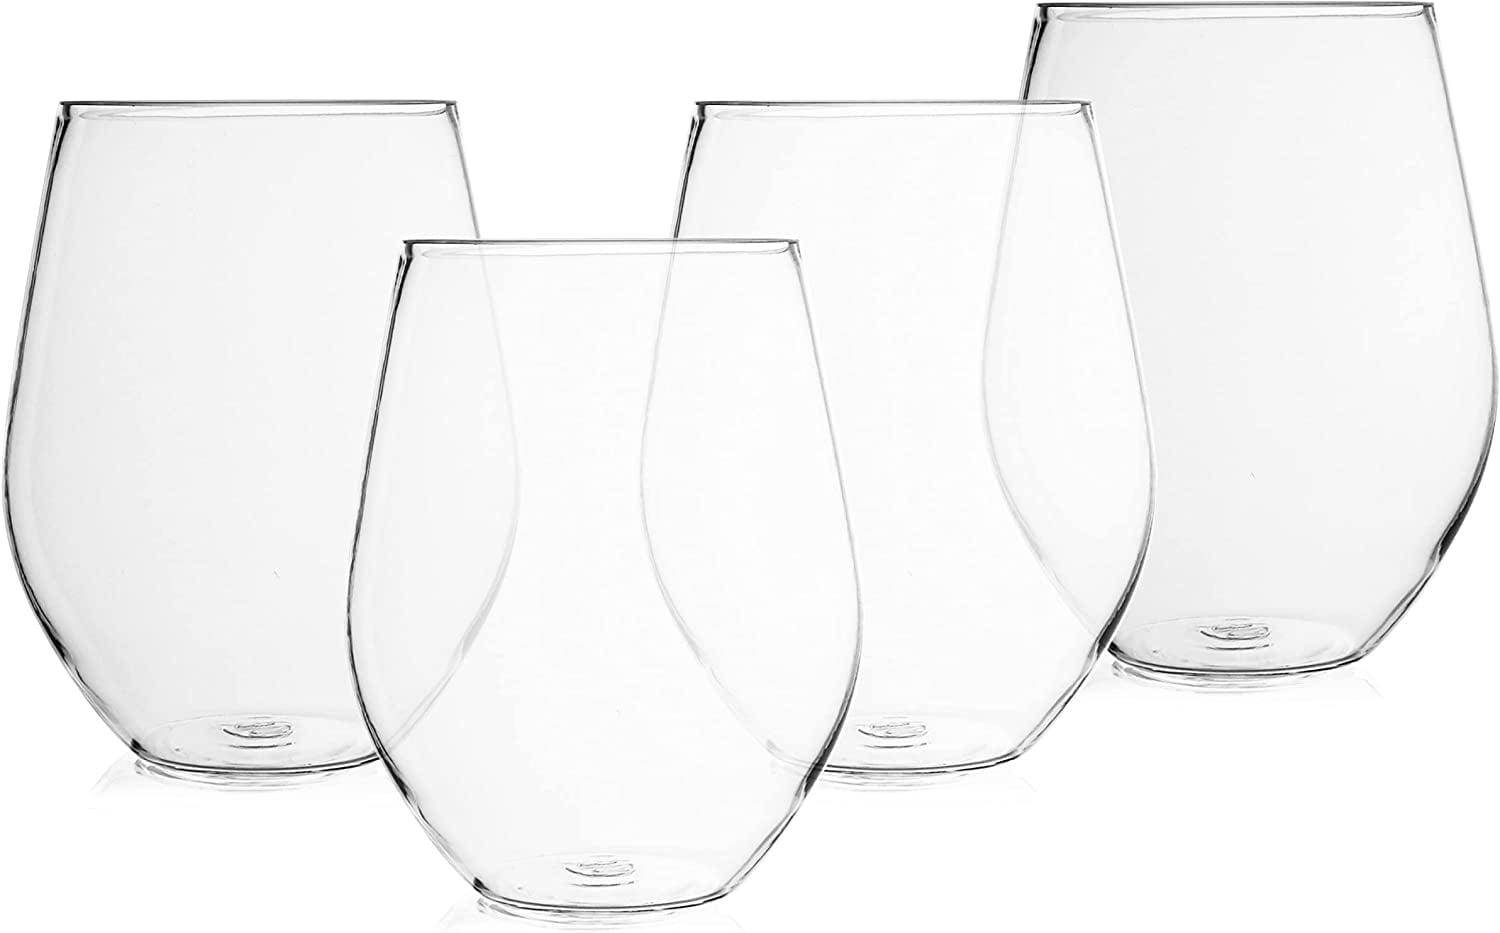 CORK GENIUS Unbreakable White Wine Glasses, Shatterproof and BPA-Free  Tritan Plastic, Scratch-Resistant Wine Goblets with Stem, Dishwasher Safe,  4